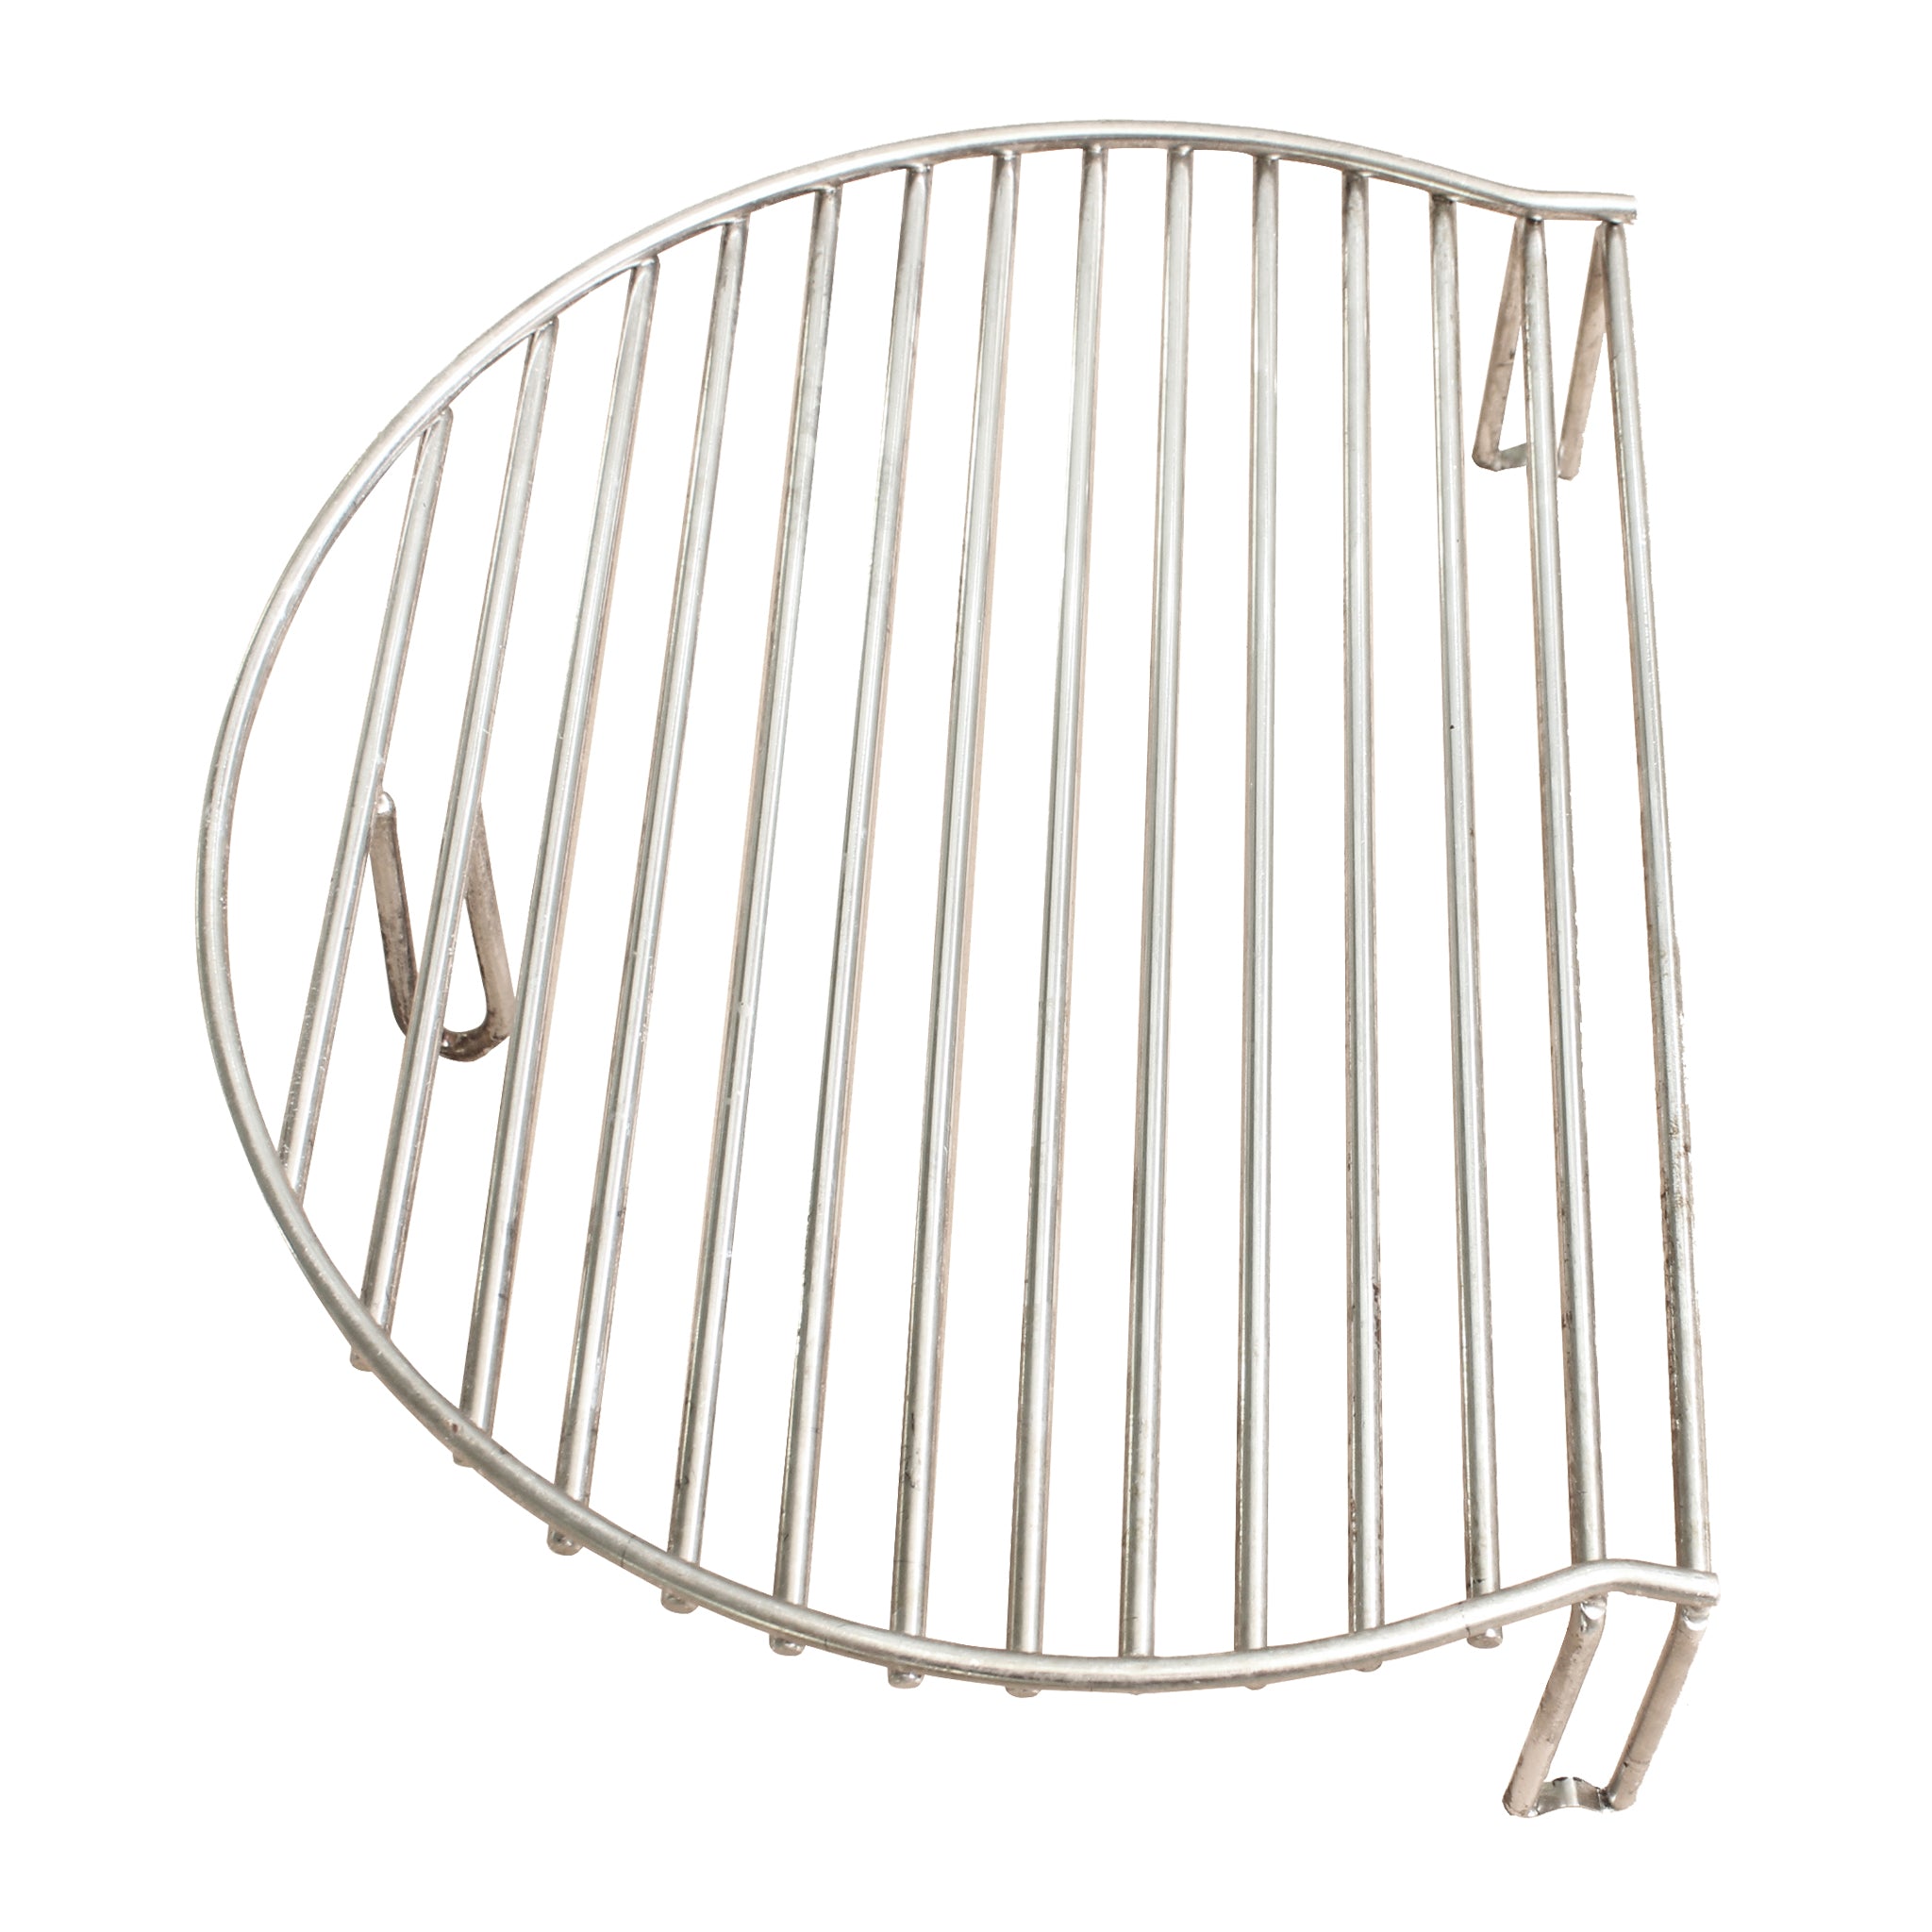 Cooking Grid Expander for 18" Kamado Grills